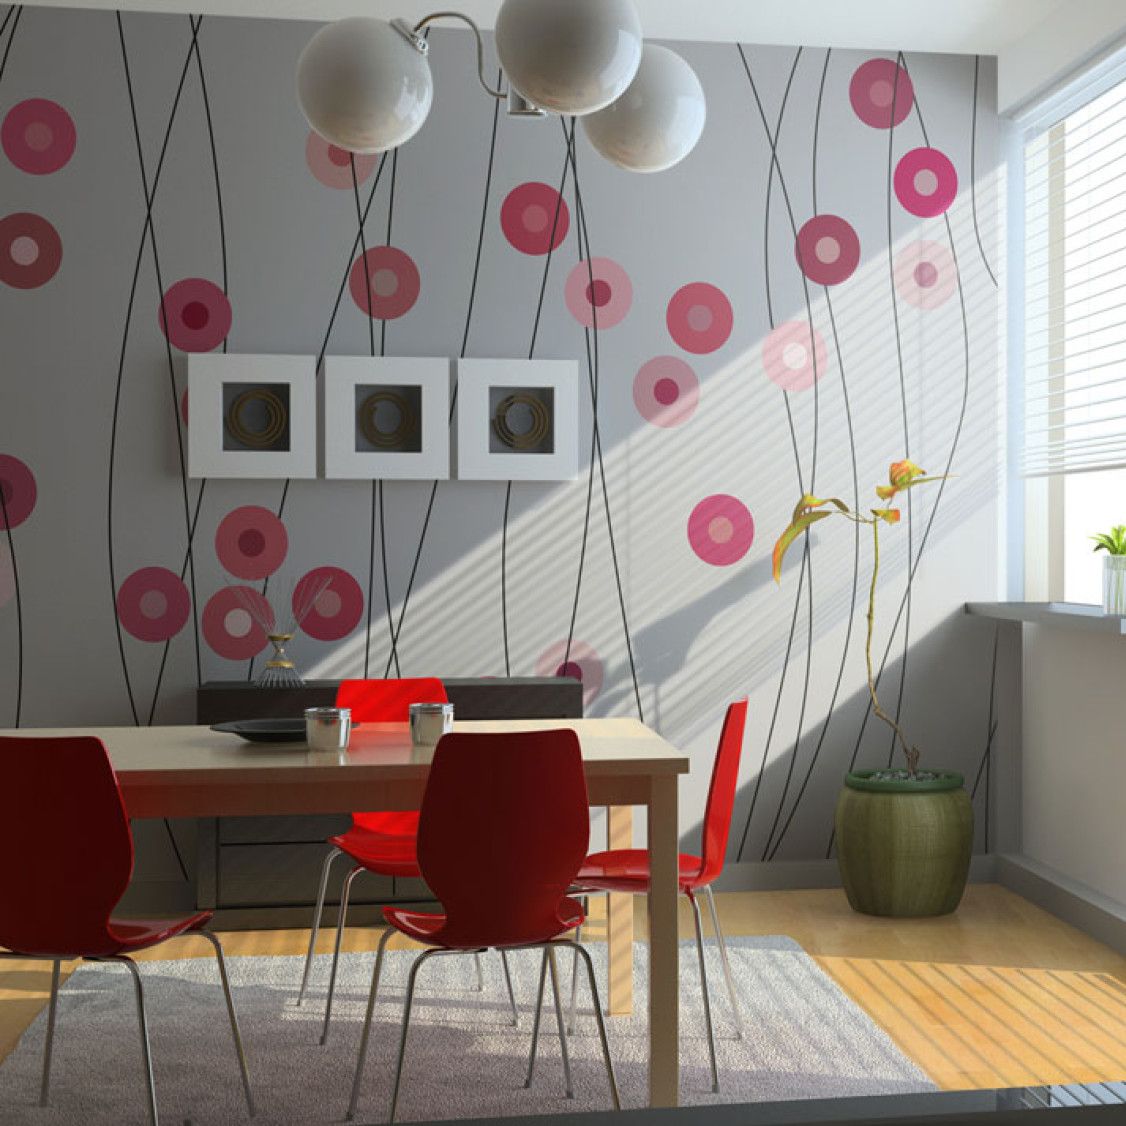 a modern dining room table and chair next to a sunny window with a beautiful wallpaper mural with gray background and pink circles design mounted in the background of the dining room wall